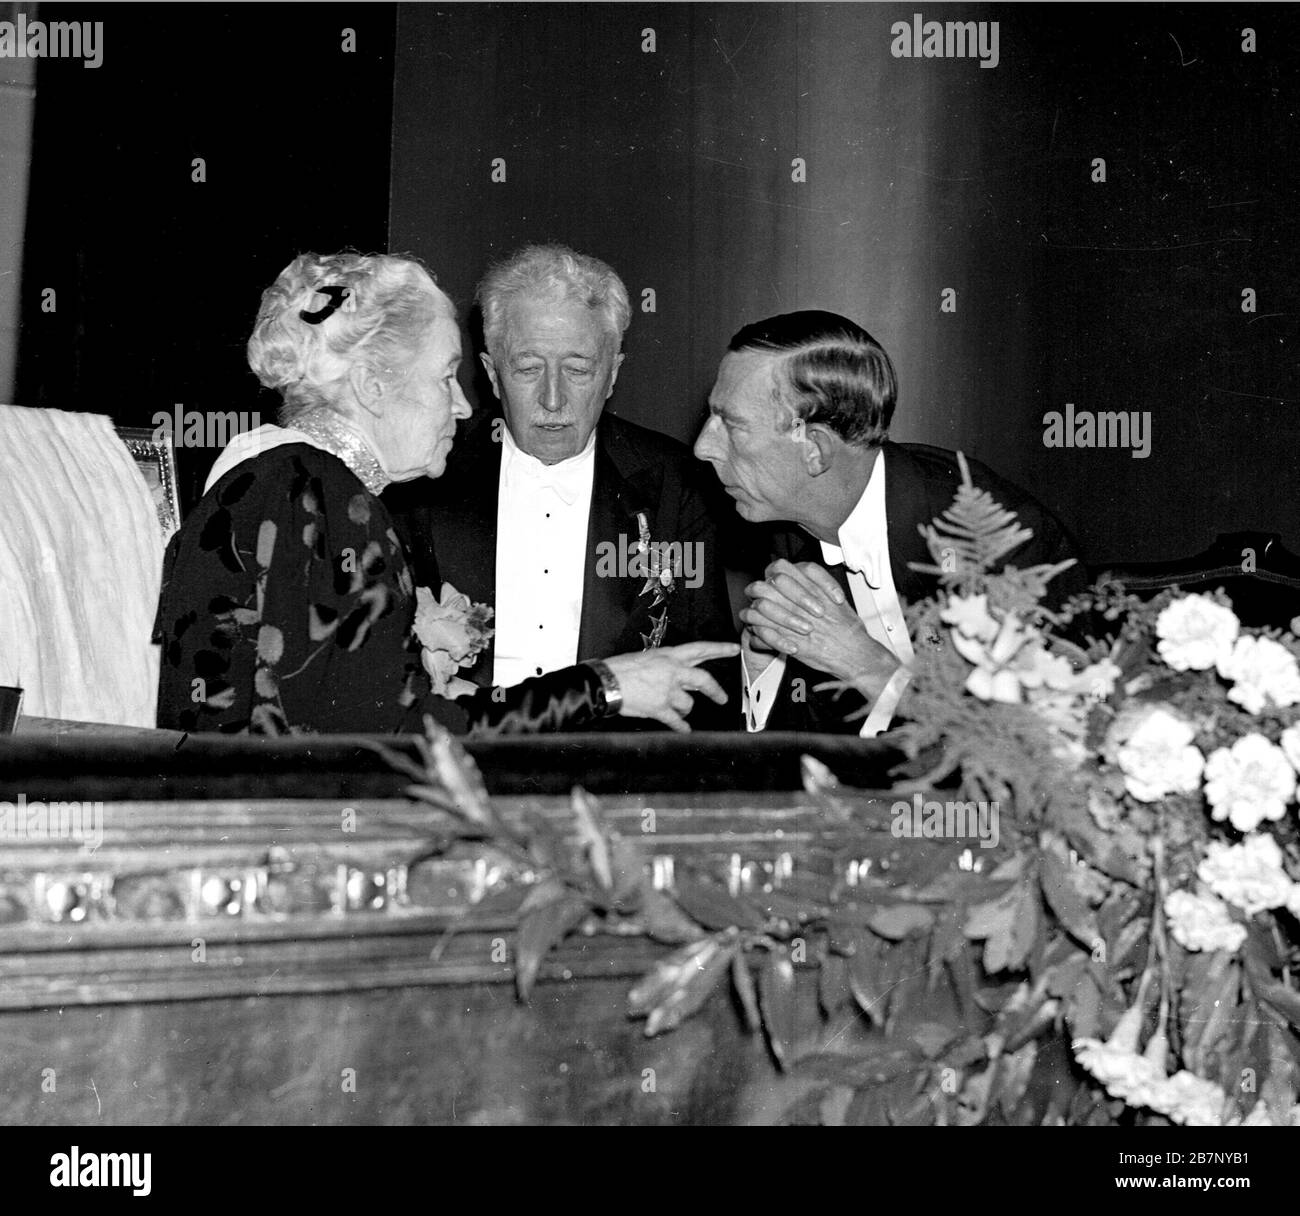 Selma Lagerlof (1858-1940), Swedish writer, together with the princes Eugen and Wilhelm at a party performance at the Dramaten theatre in Stockholm, for her 80th birthday on 20/11 1938. Stock Photo